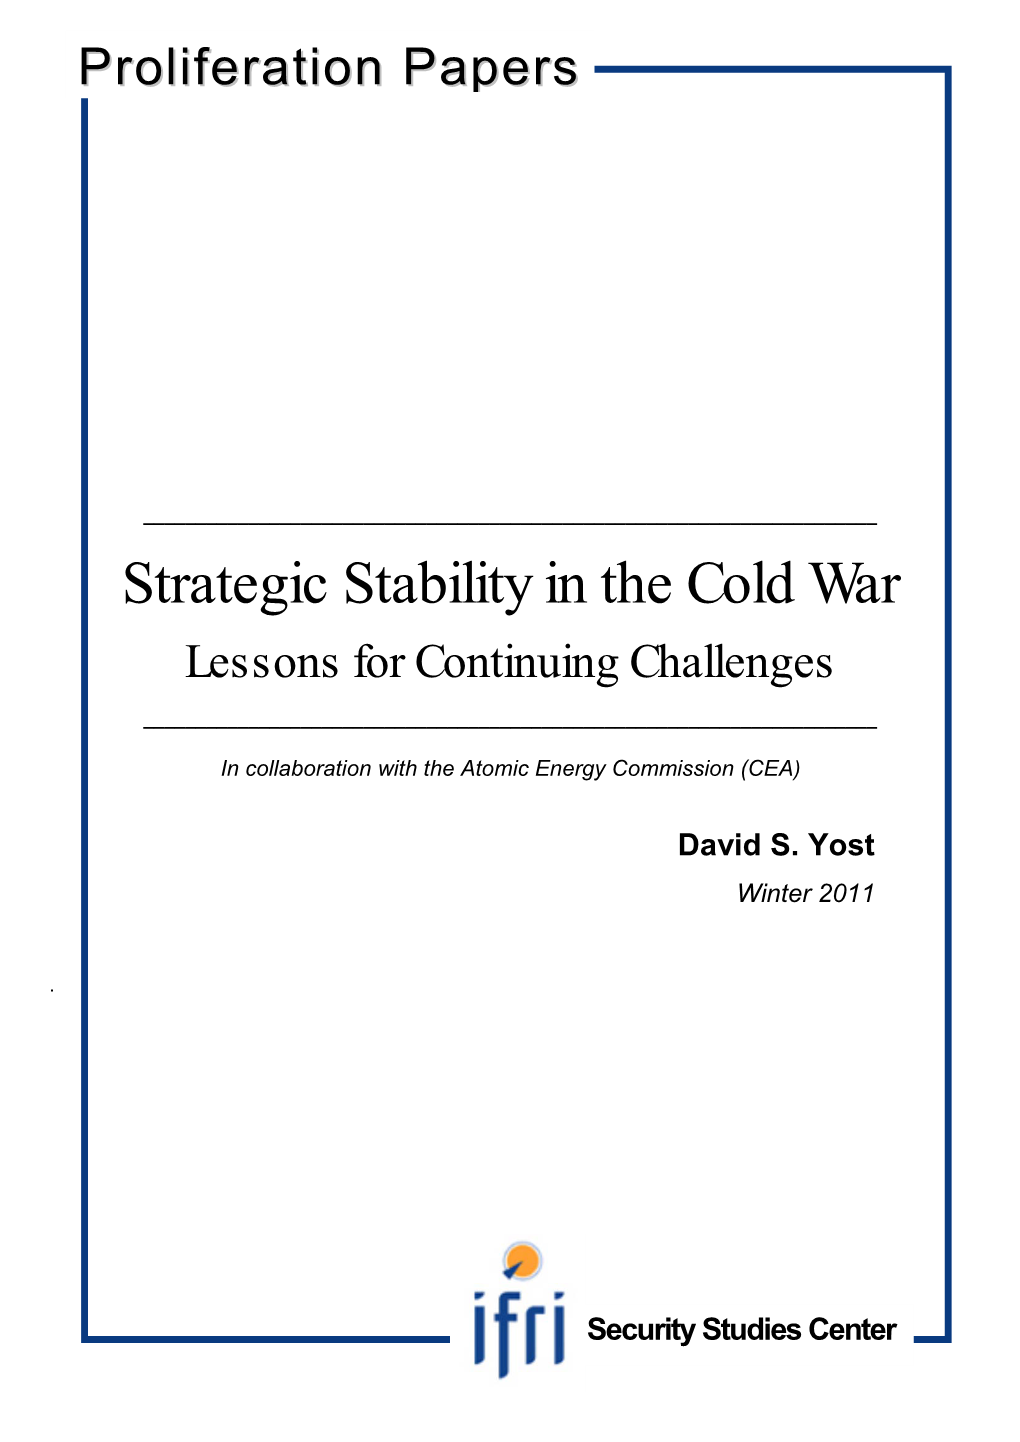 Strategic Stability in the Cold War Lessons for Continuing Challenges